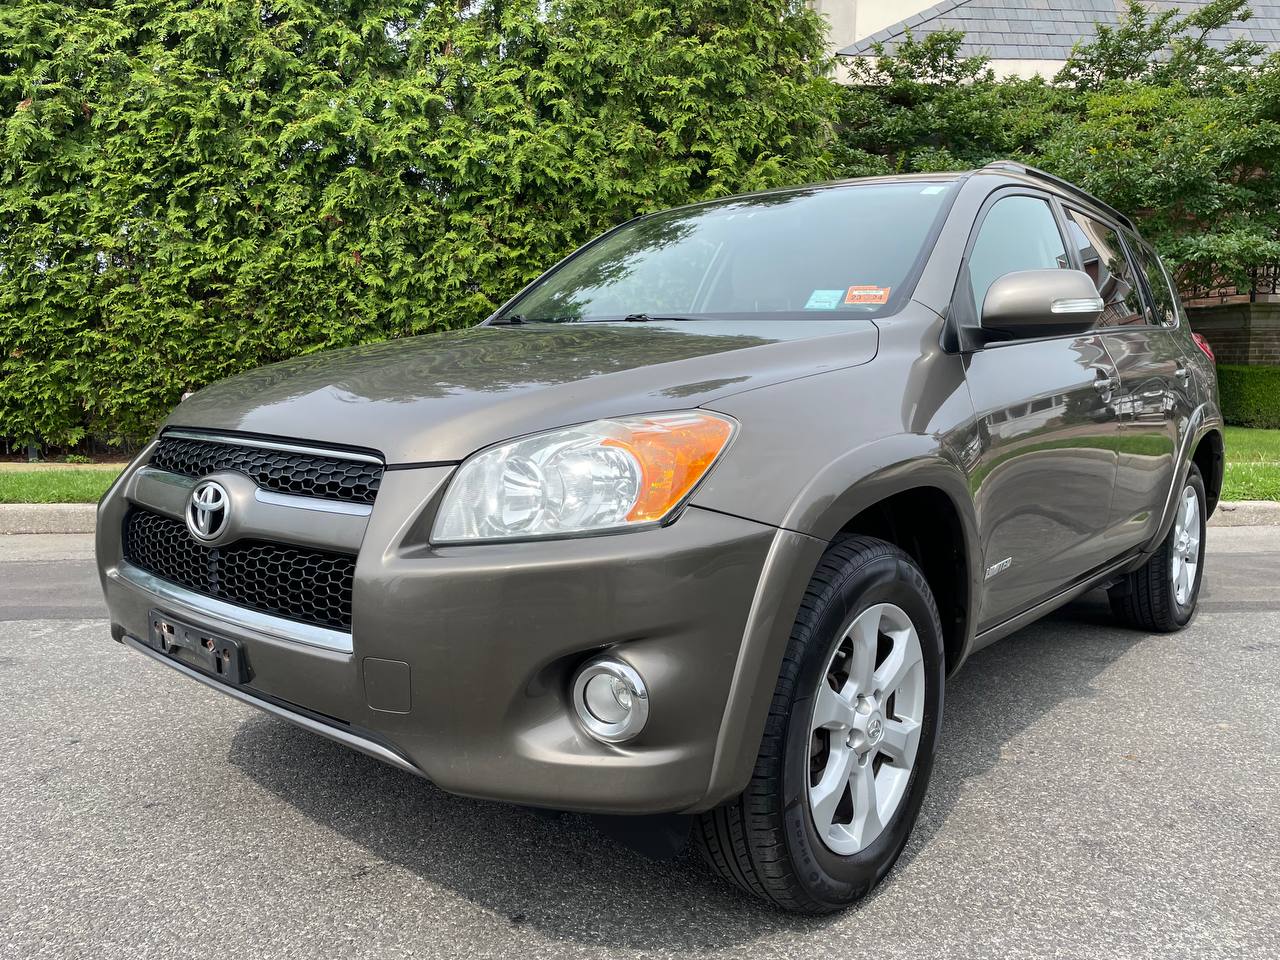 Used Car - 2011 Toyota RAV4 Limited 4x4 for Sale in Staten Island, NY